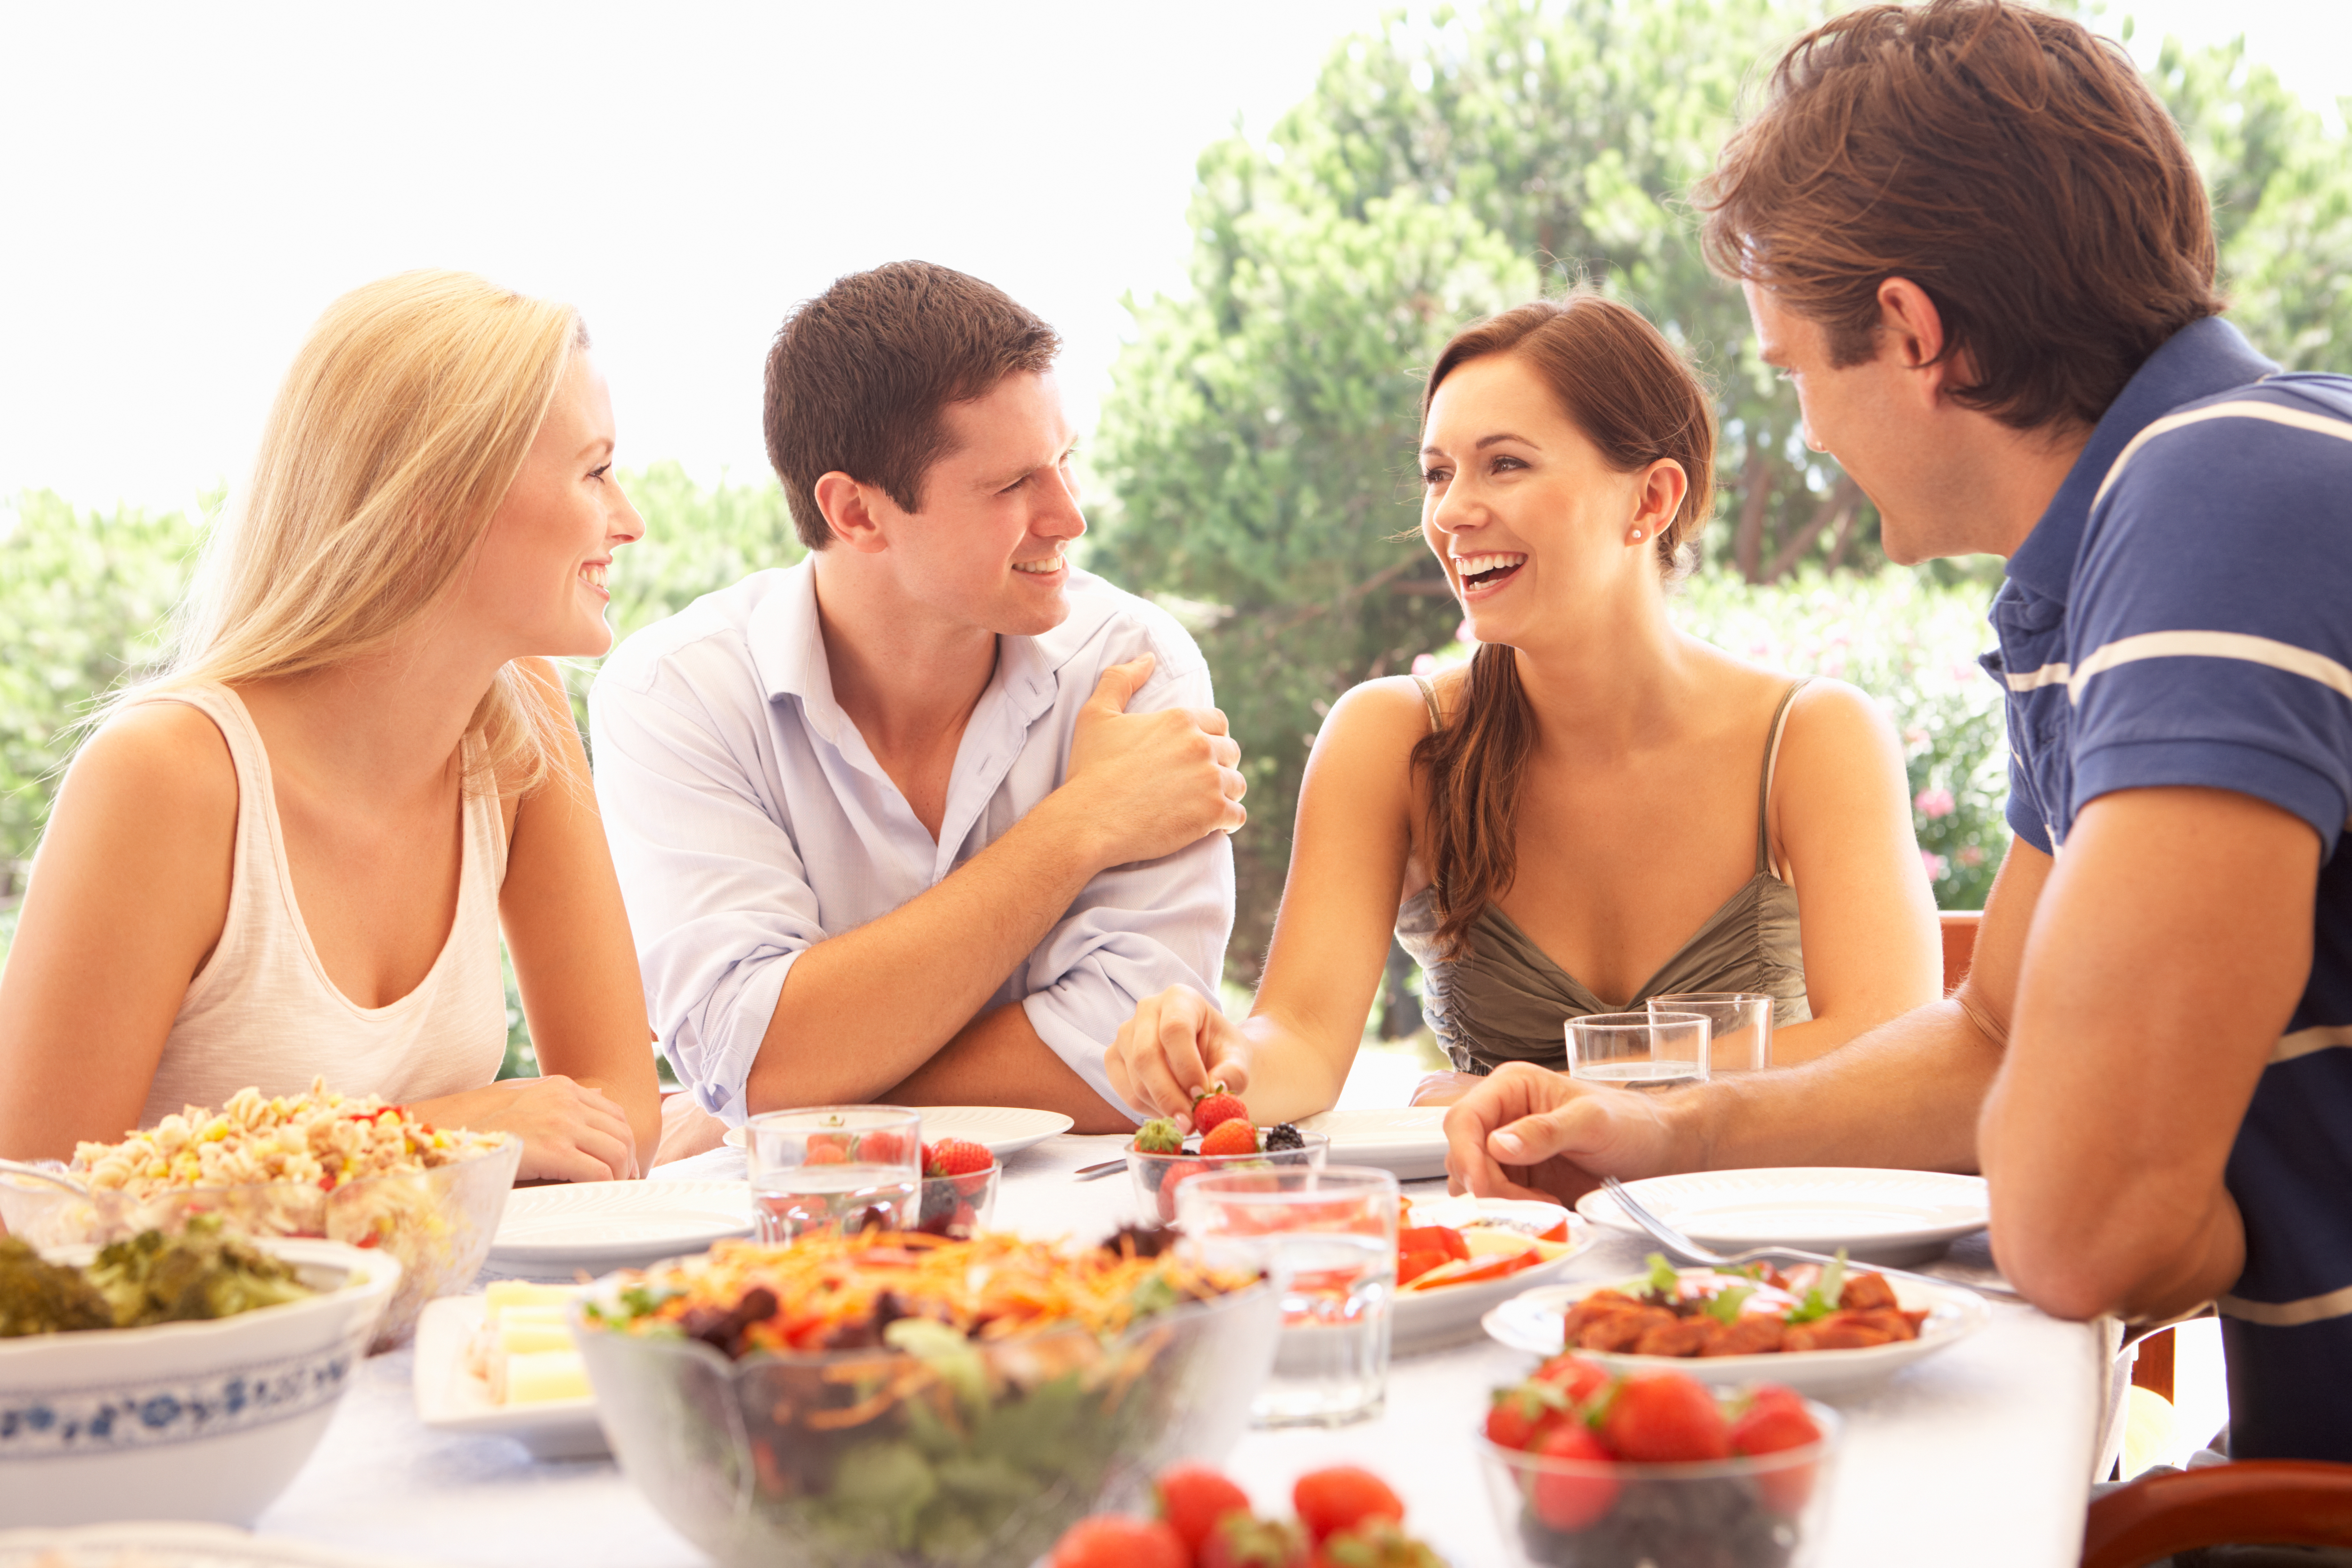 Two young couples eating outdoors | Source: Shutterstock